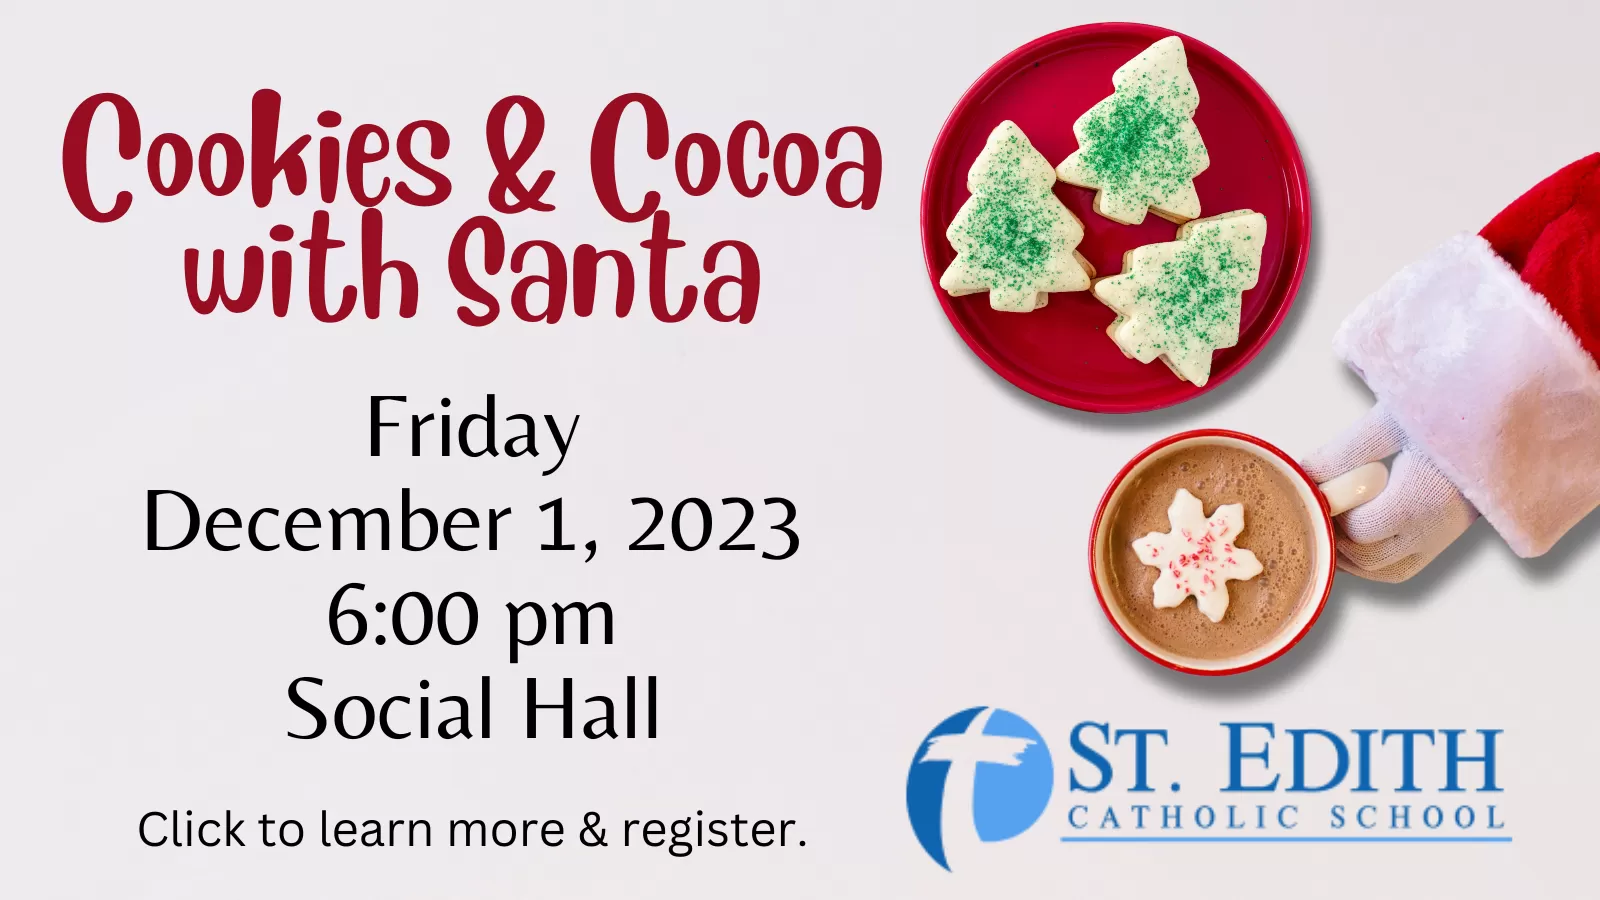 Cookies & Cocoa with Santa